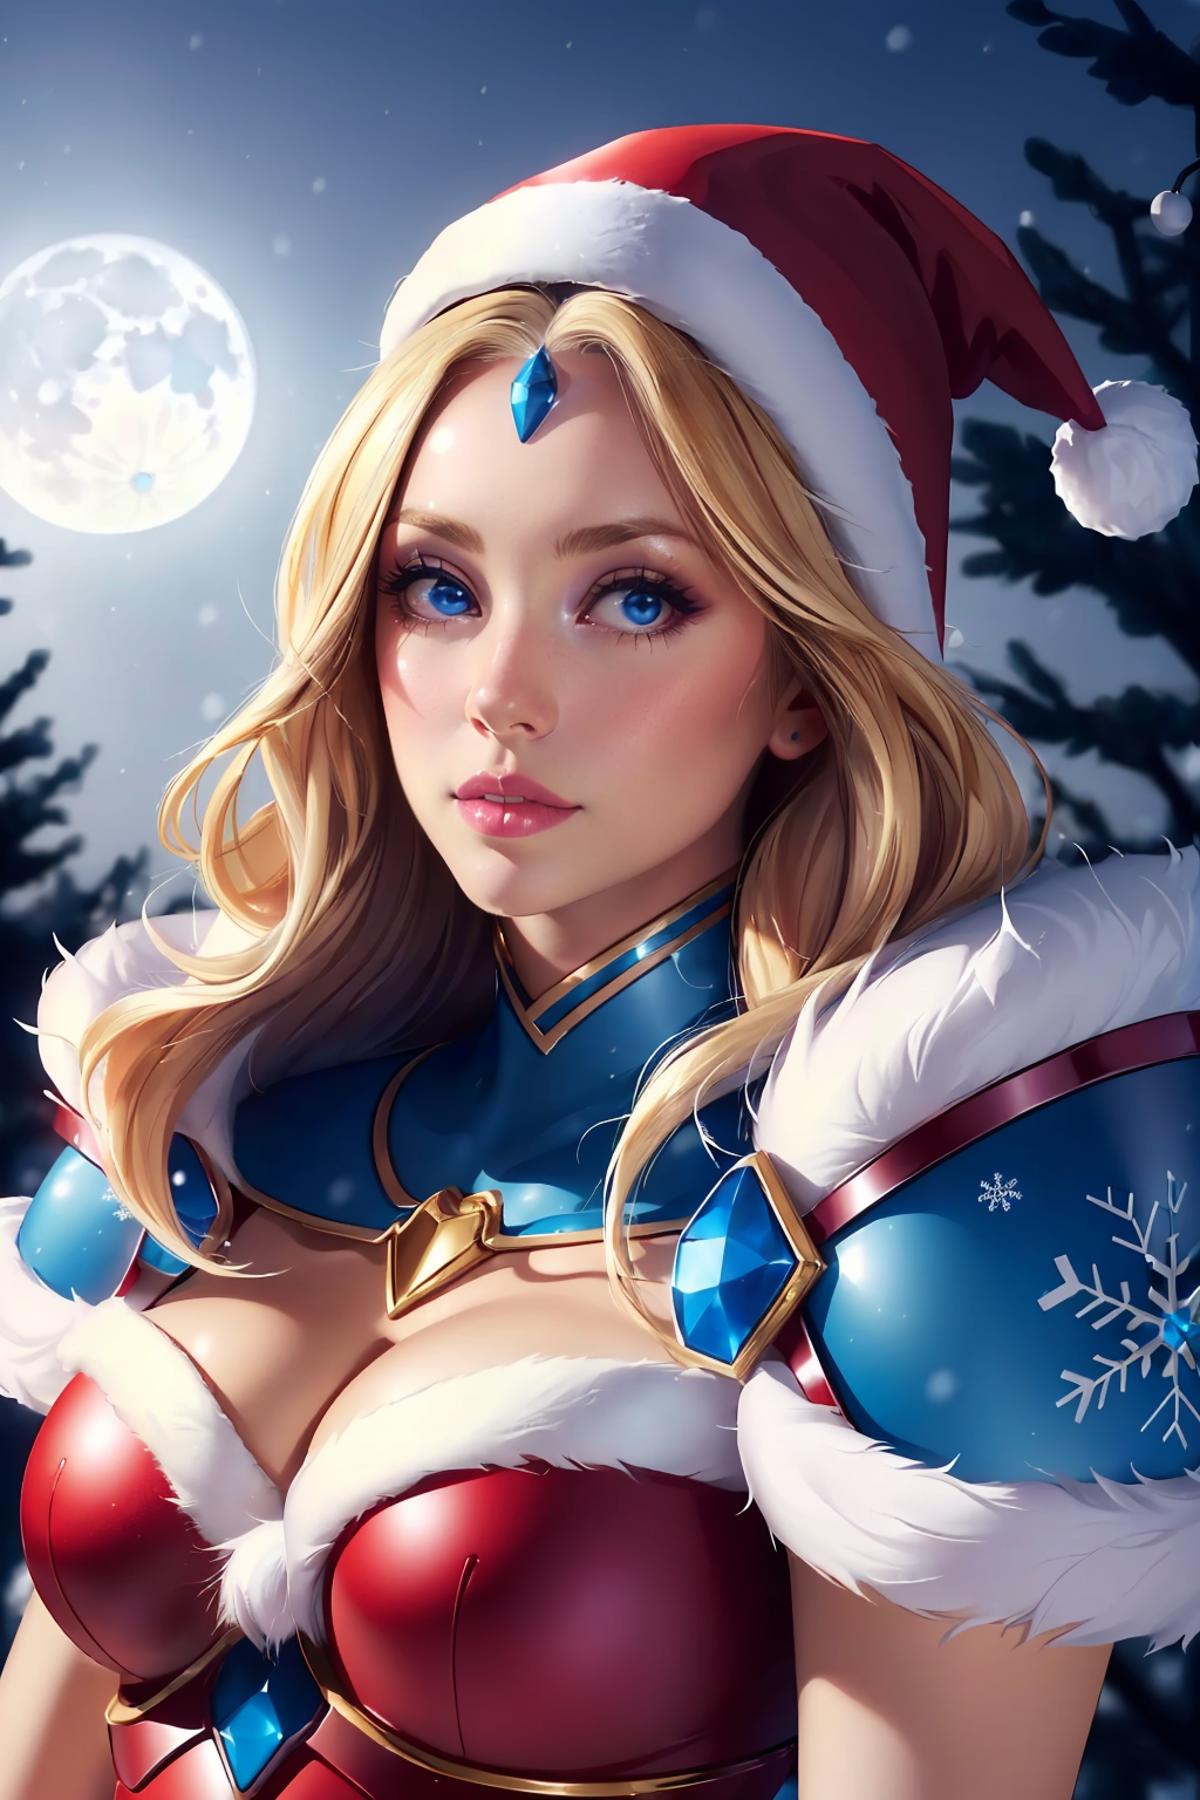 Crystal Maiden (Dota 2) image by tempick